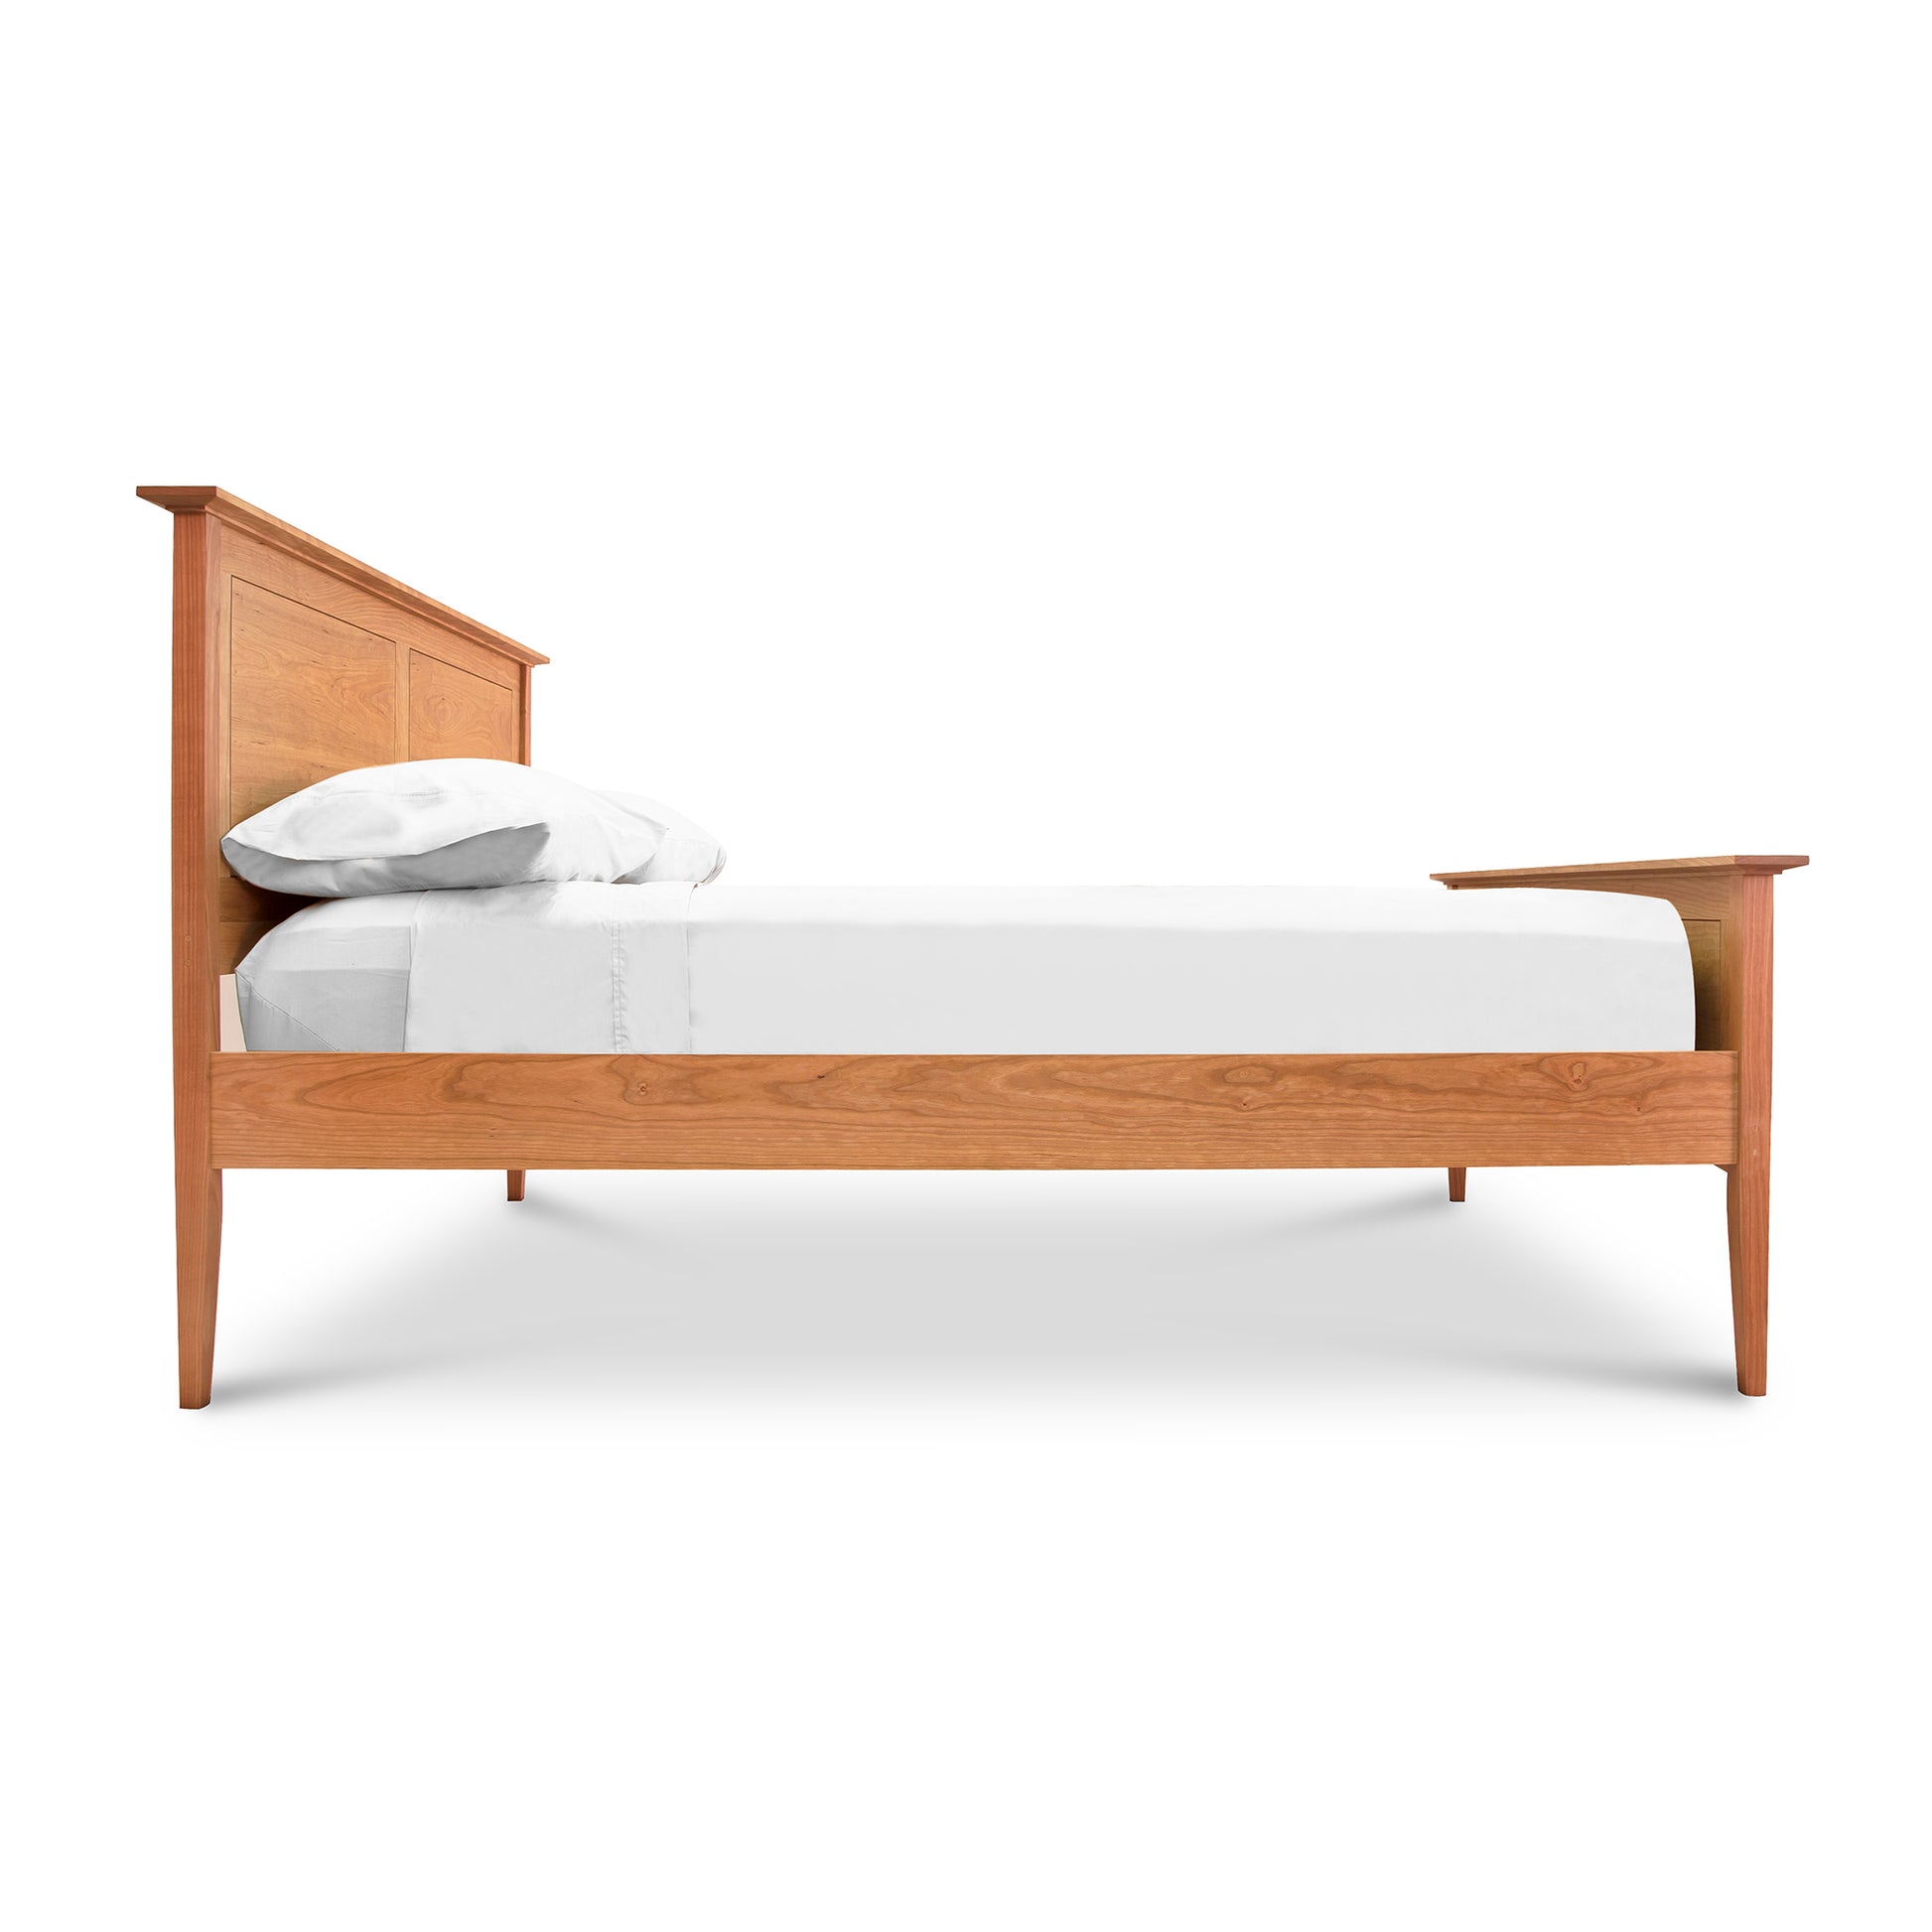 A Maple Corner Woodworks American Shaker Panel Bed with a wooden headboard and footboard.